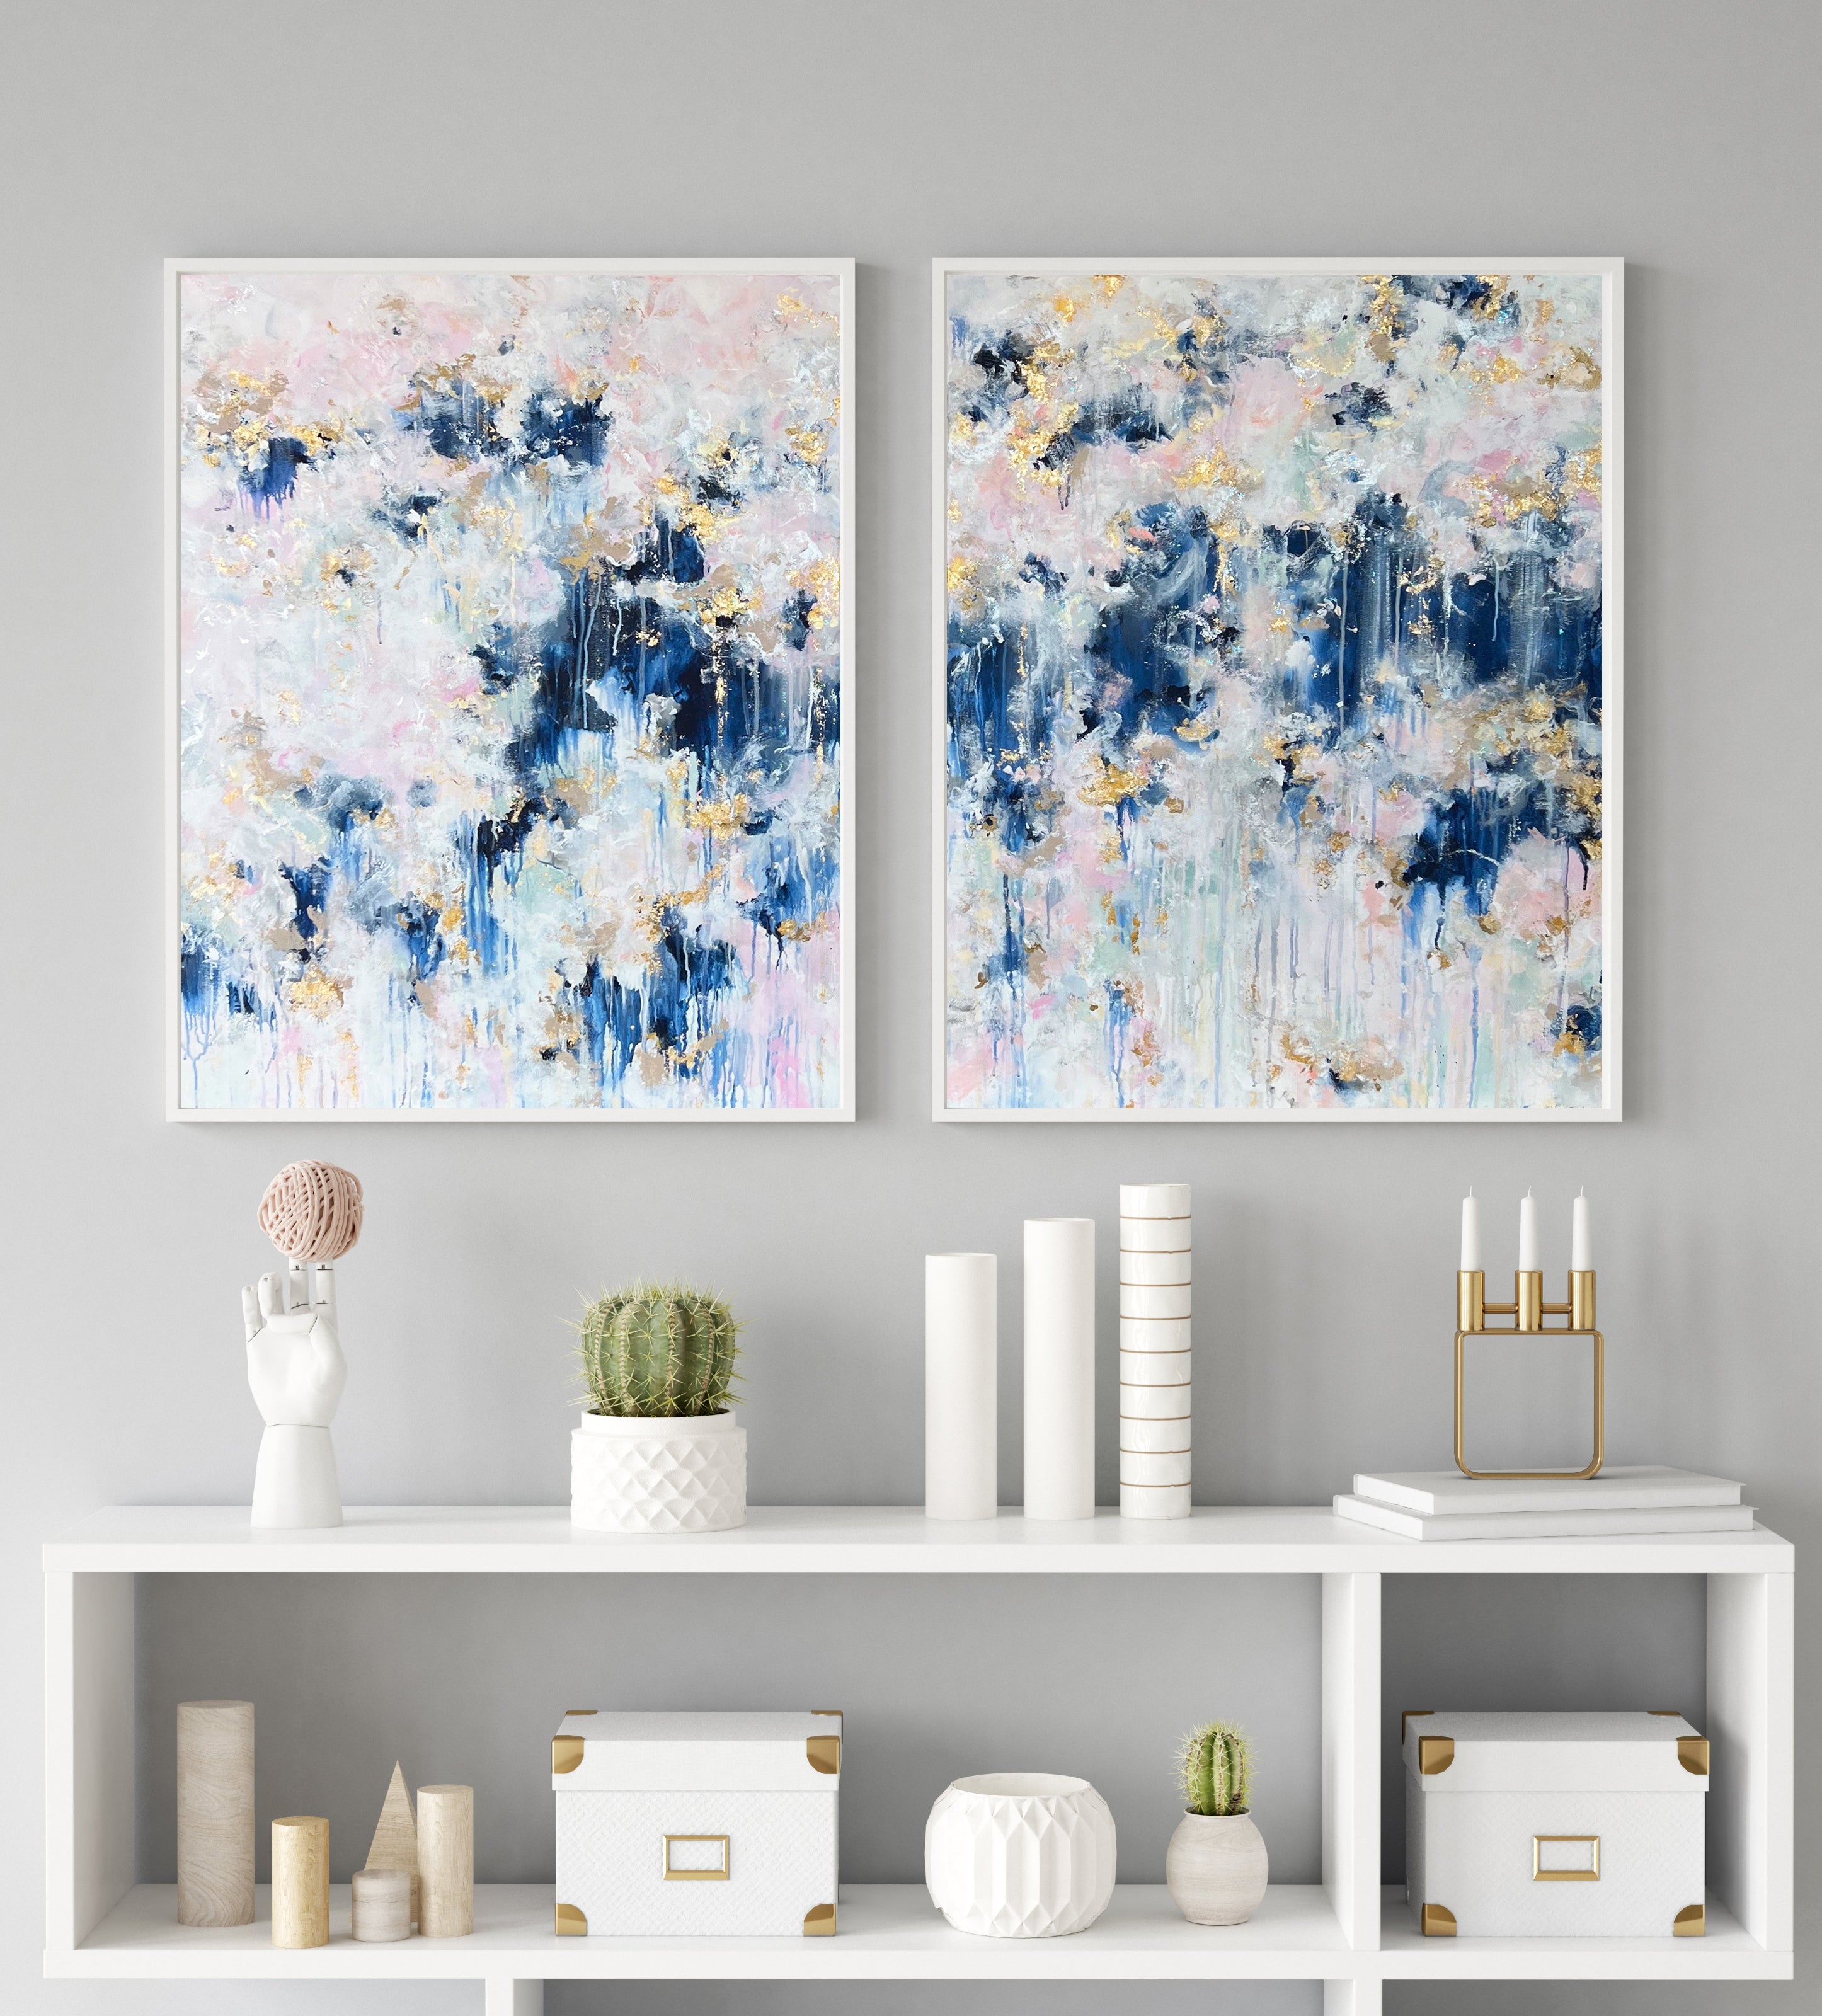 Elegant Abstract Painting - Wall Decor For Home & Office| Chels Made